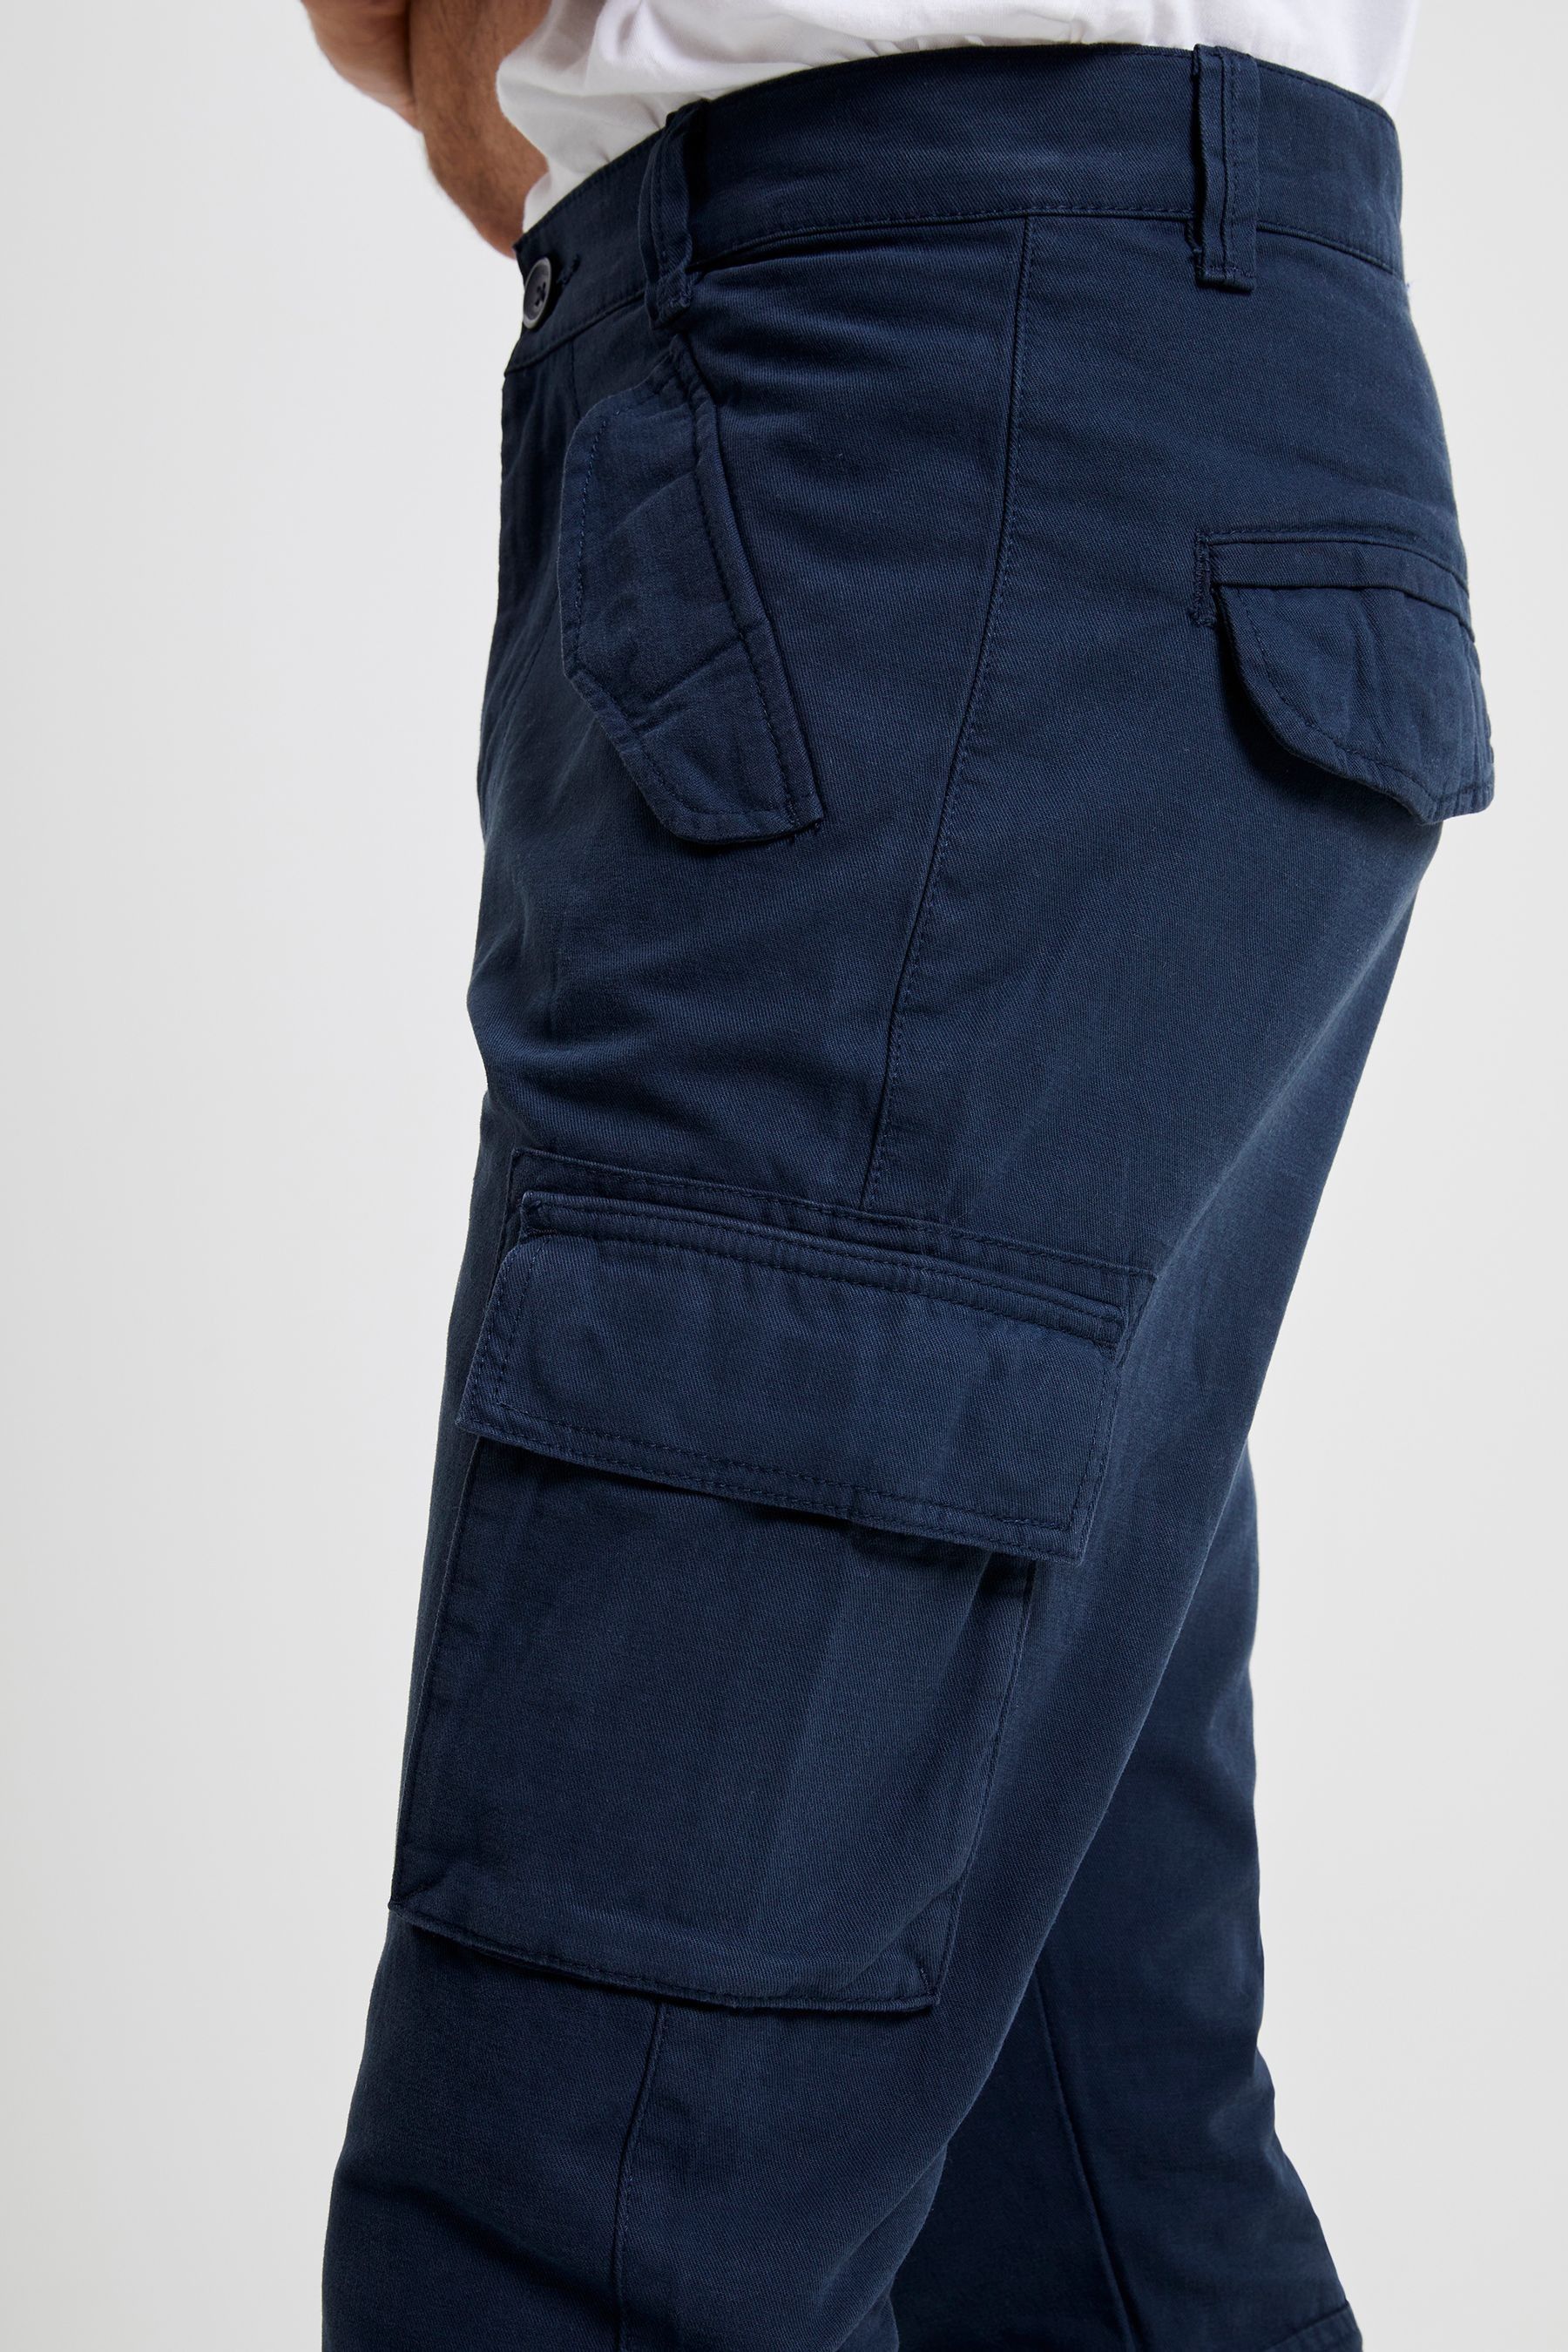 Buy French Connection Marine Cargo Joggers from the Next UK online shop